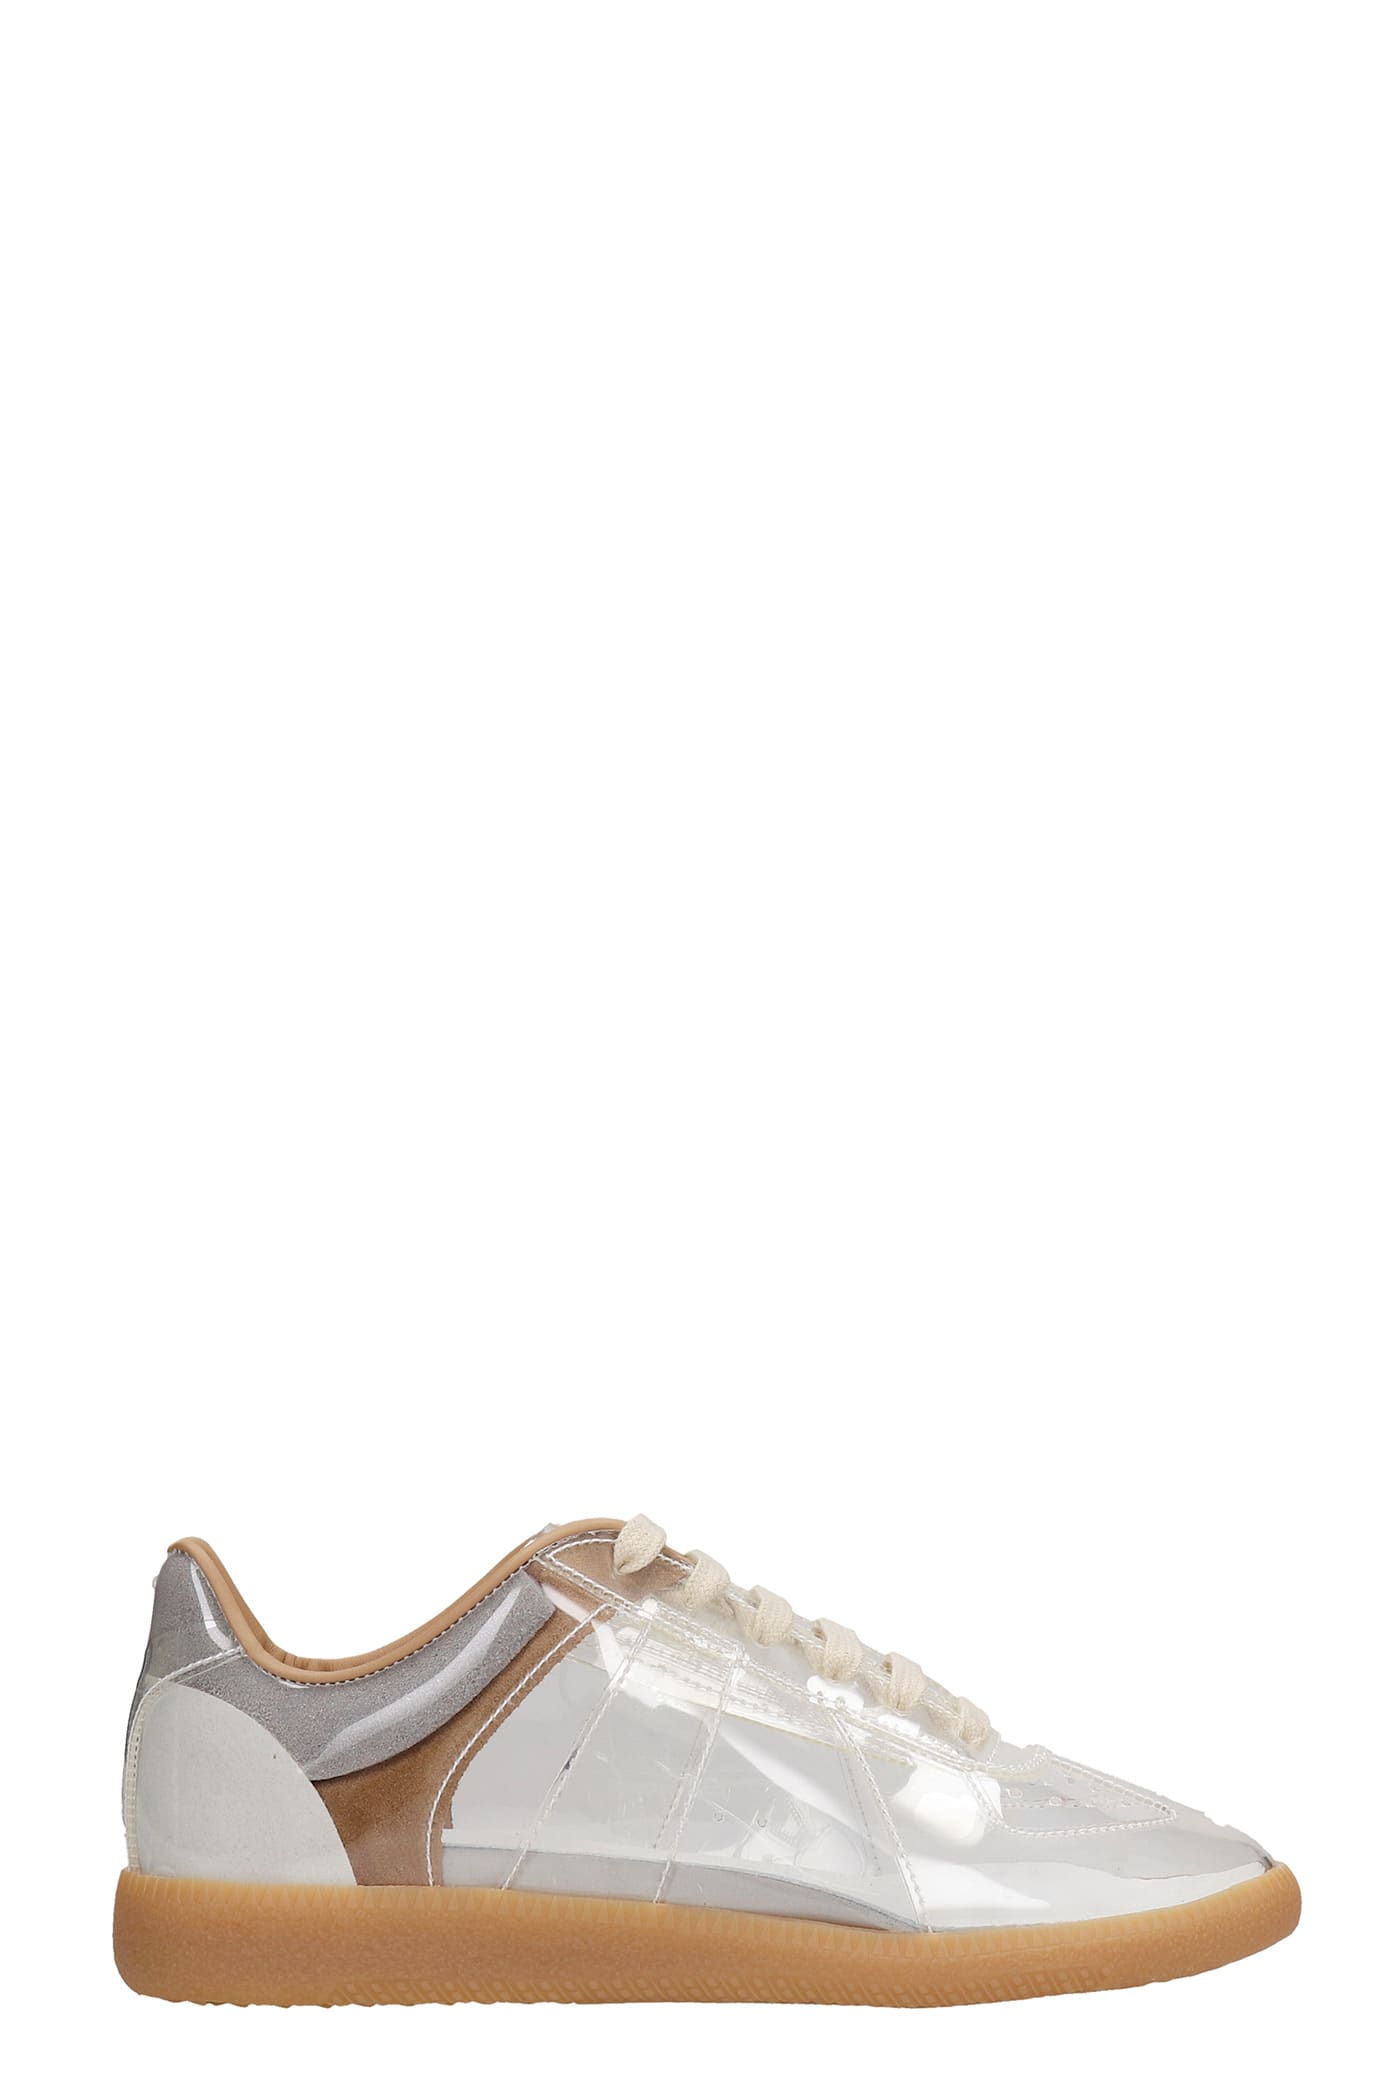 Buy Maison Margiela Sneakers In Transparent Pvc online, shop Maison Margiela shoes with free shipping